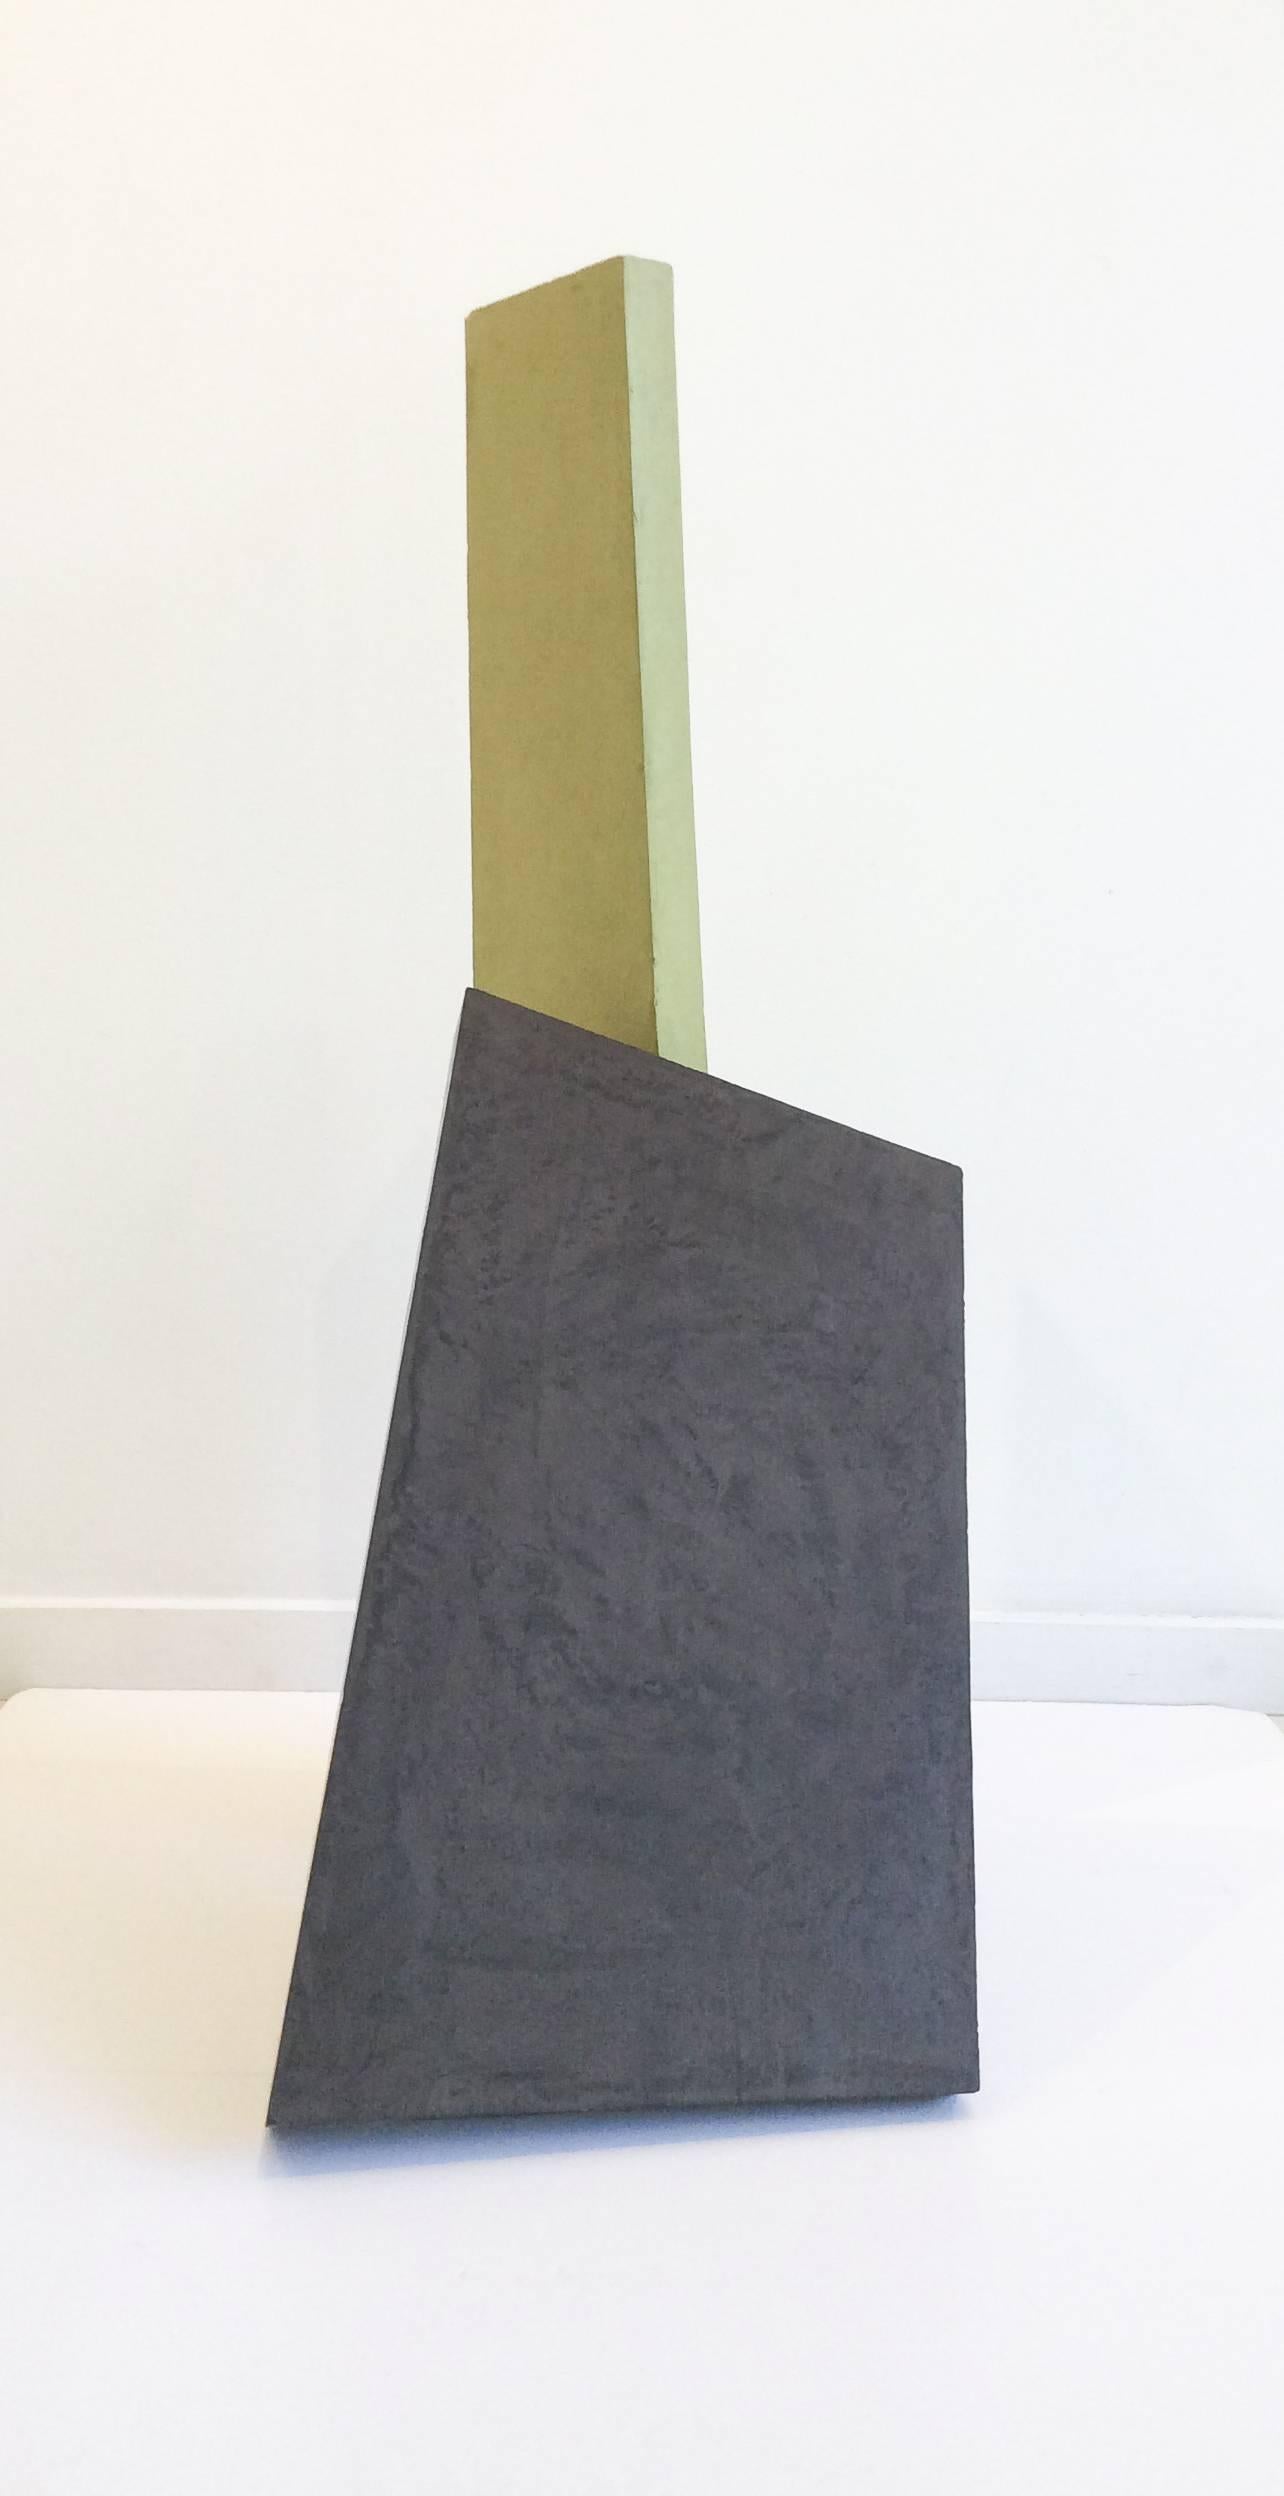 Just Lean on Me (Contemporary Minimalist Standing Sculpture in Green & Black) - Gray Abstract Sculpture by Dai Ban